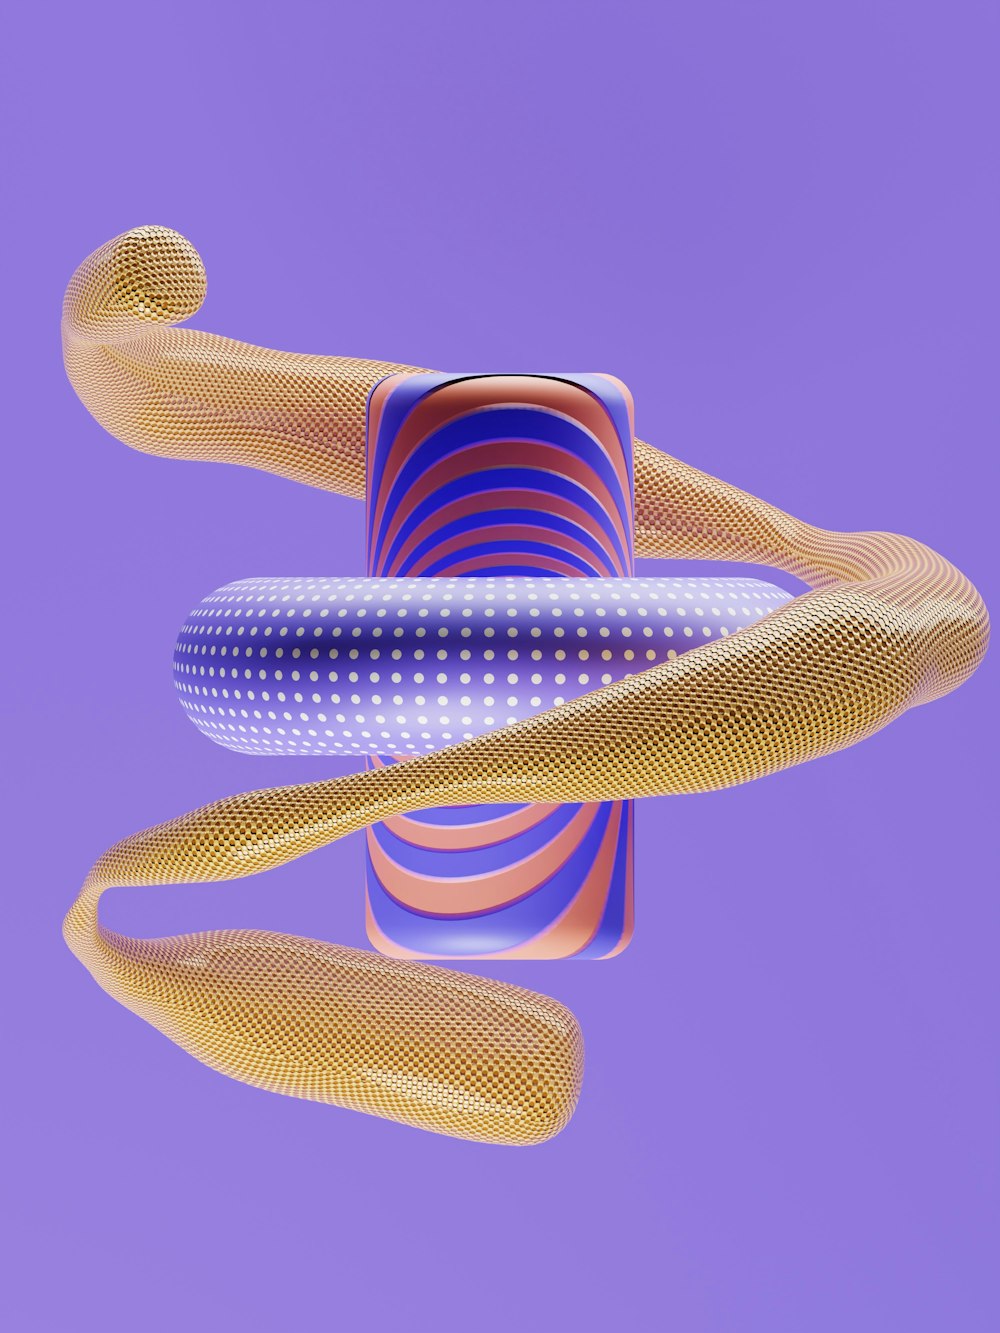 a computer generated image of a curved object